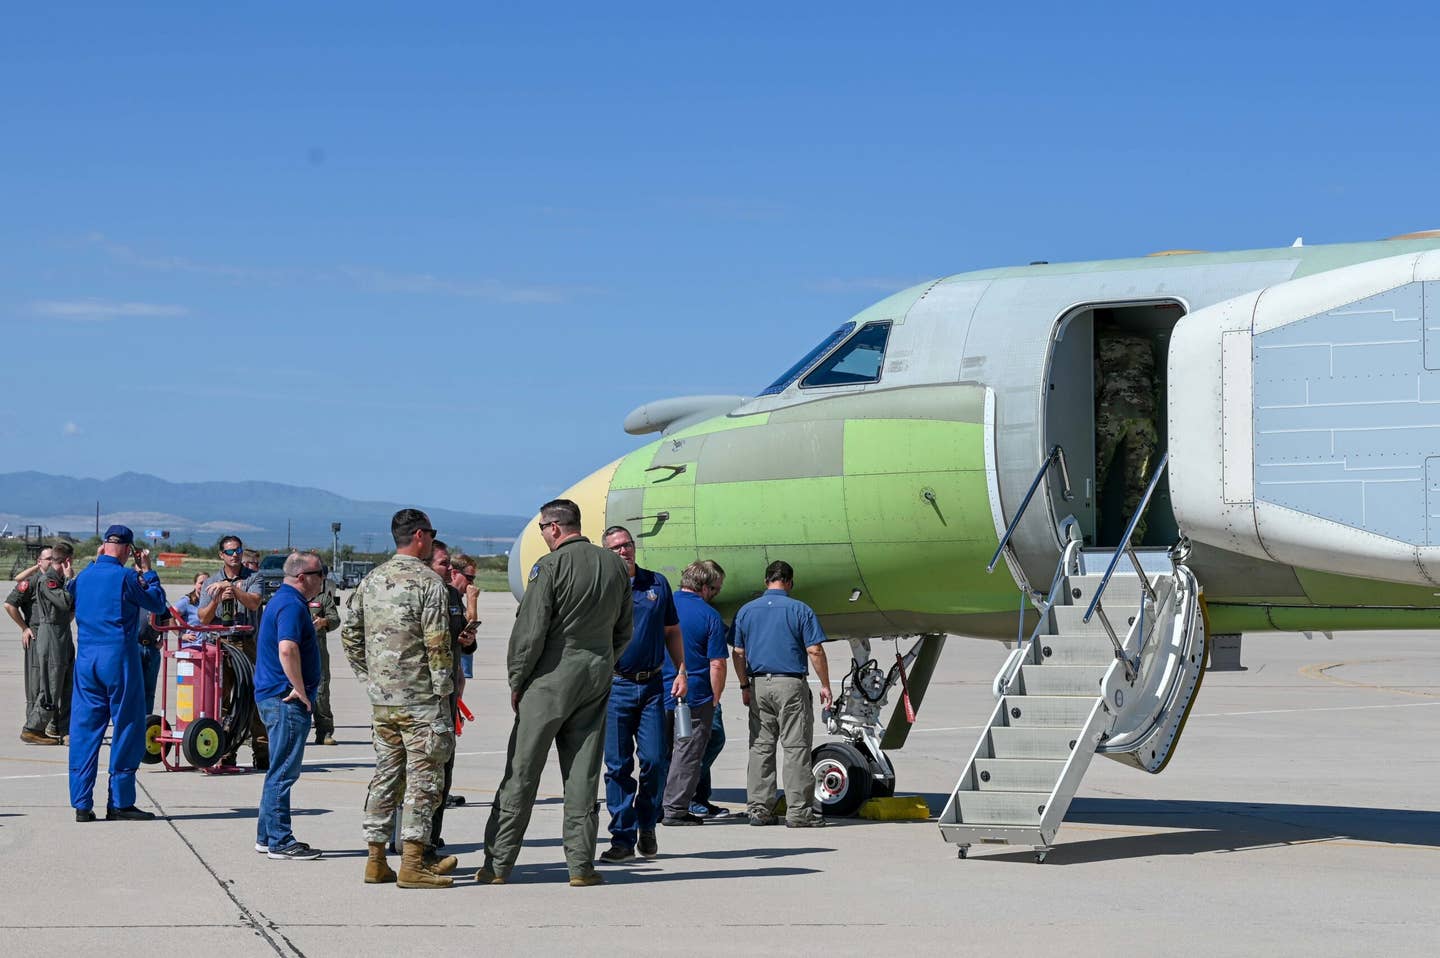 Service members admire an EC-37B Compass Call after its arrival at Davis-Monthan Air Force Base, Arizona, Aug. 17, 2022. The EC-130H Compass Call is scheduled to be replaced by the EC-37B, the first of its kind which has the enhanced flight performance of a commercial business jet airframe. (U.S. Air Force photo by Airman 1st Class)